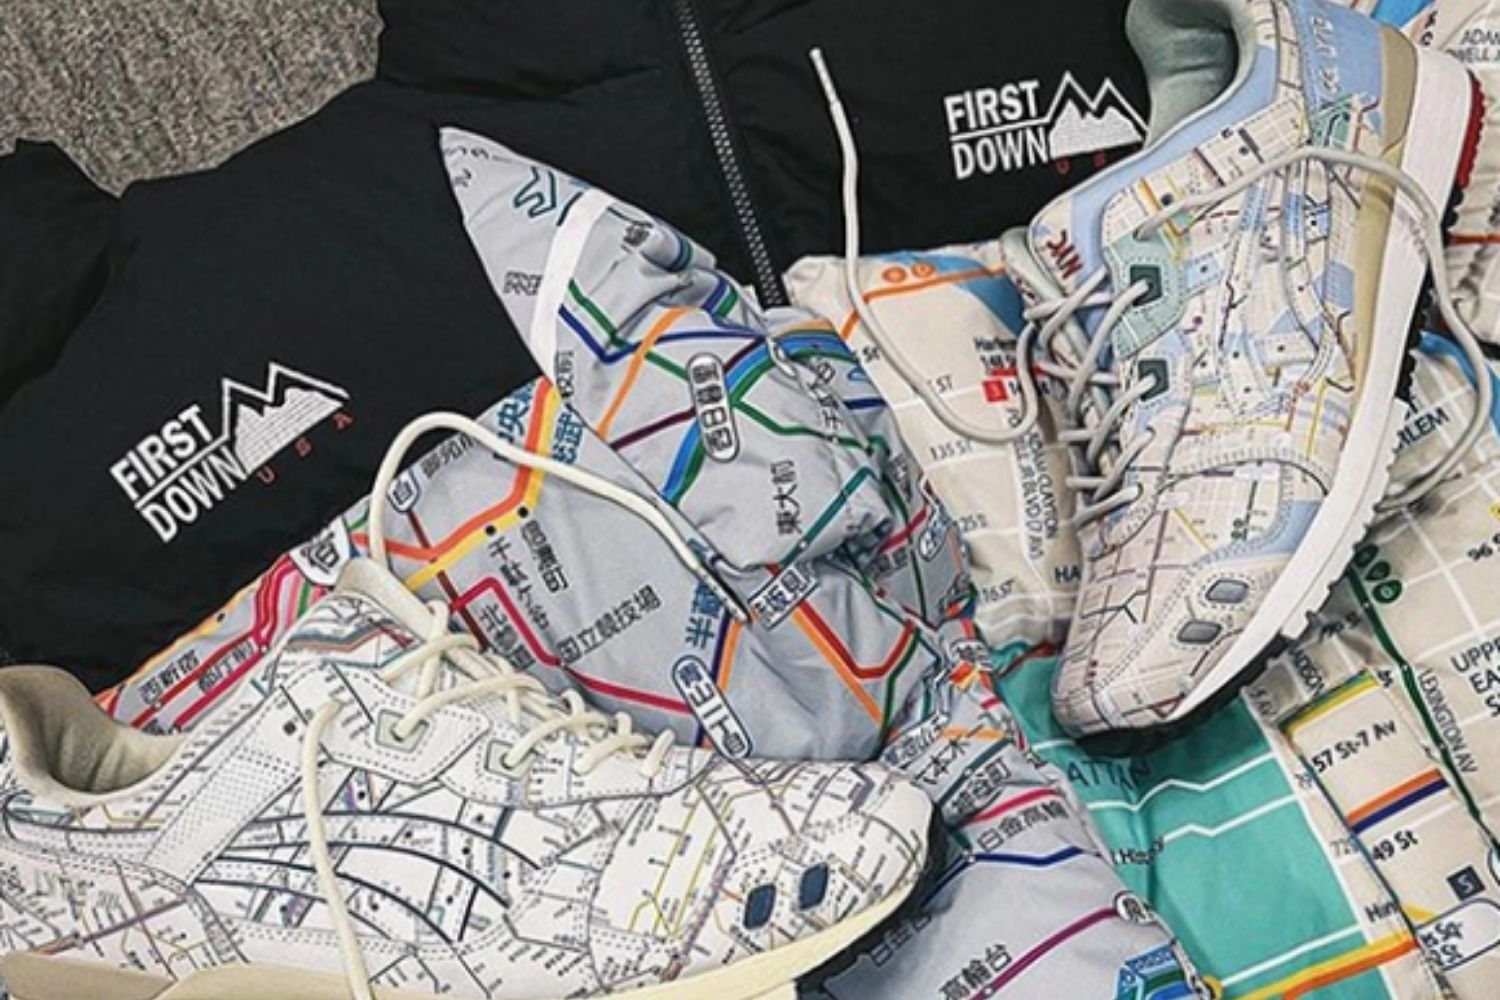 Check out the atmos x Asics Gel Lyte 3 Subway Pack here